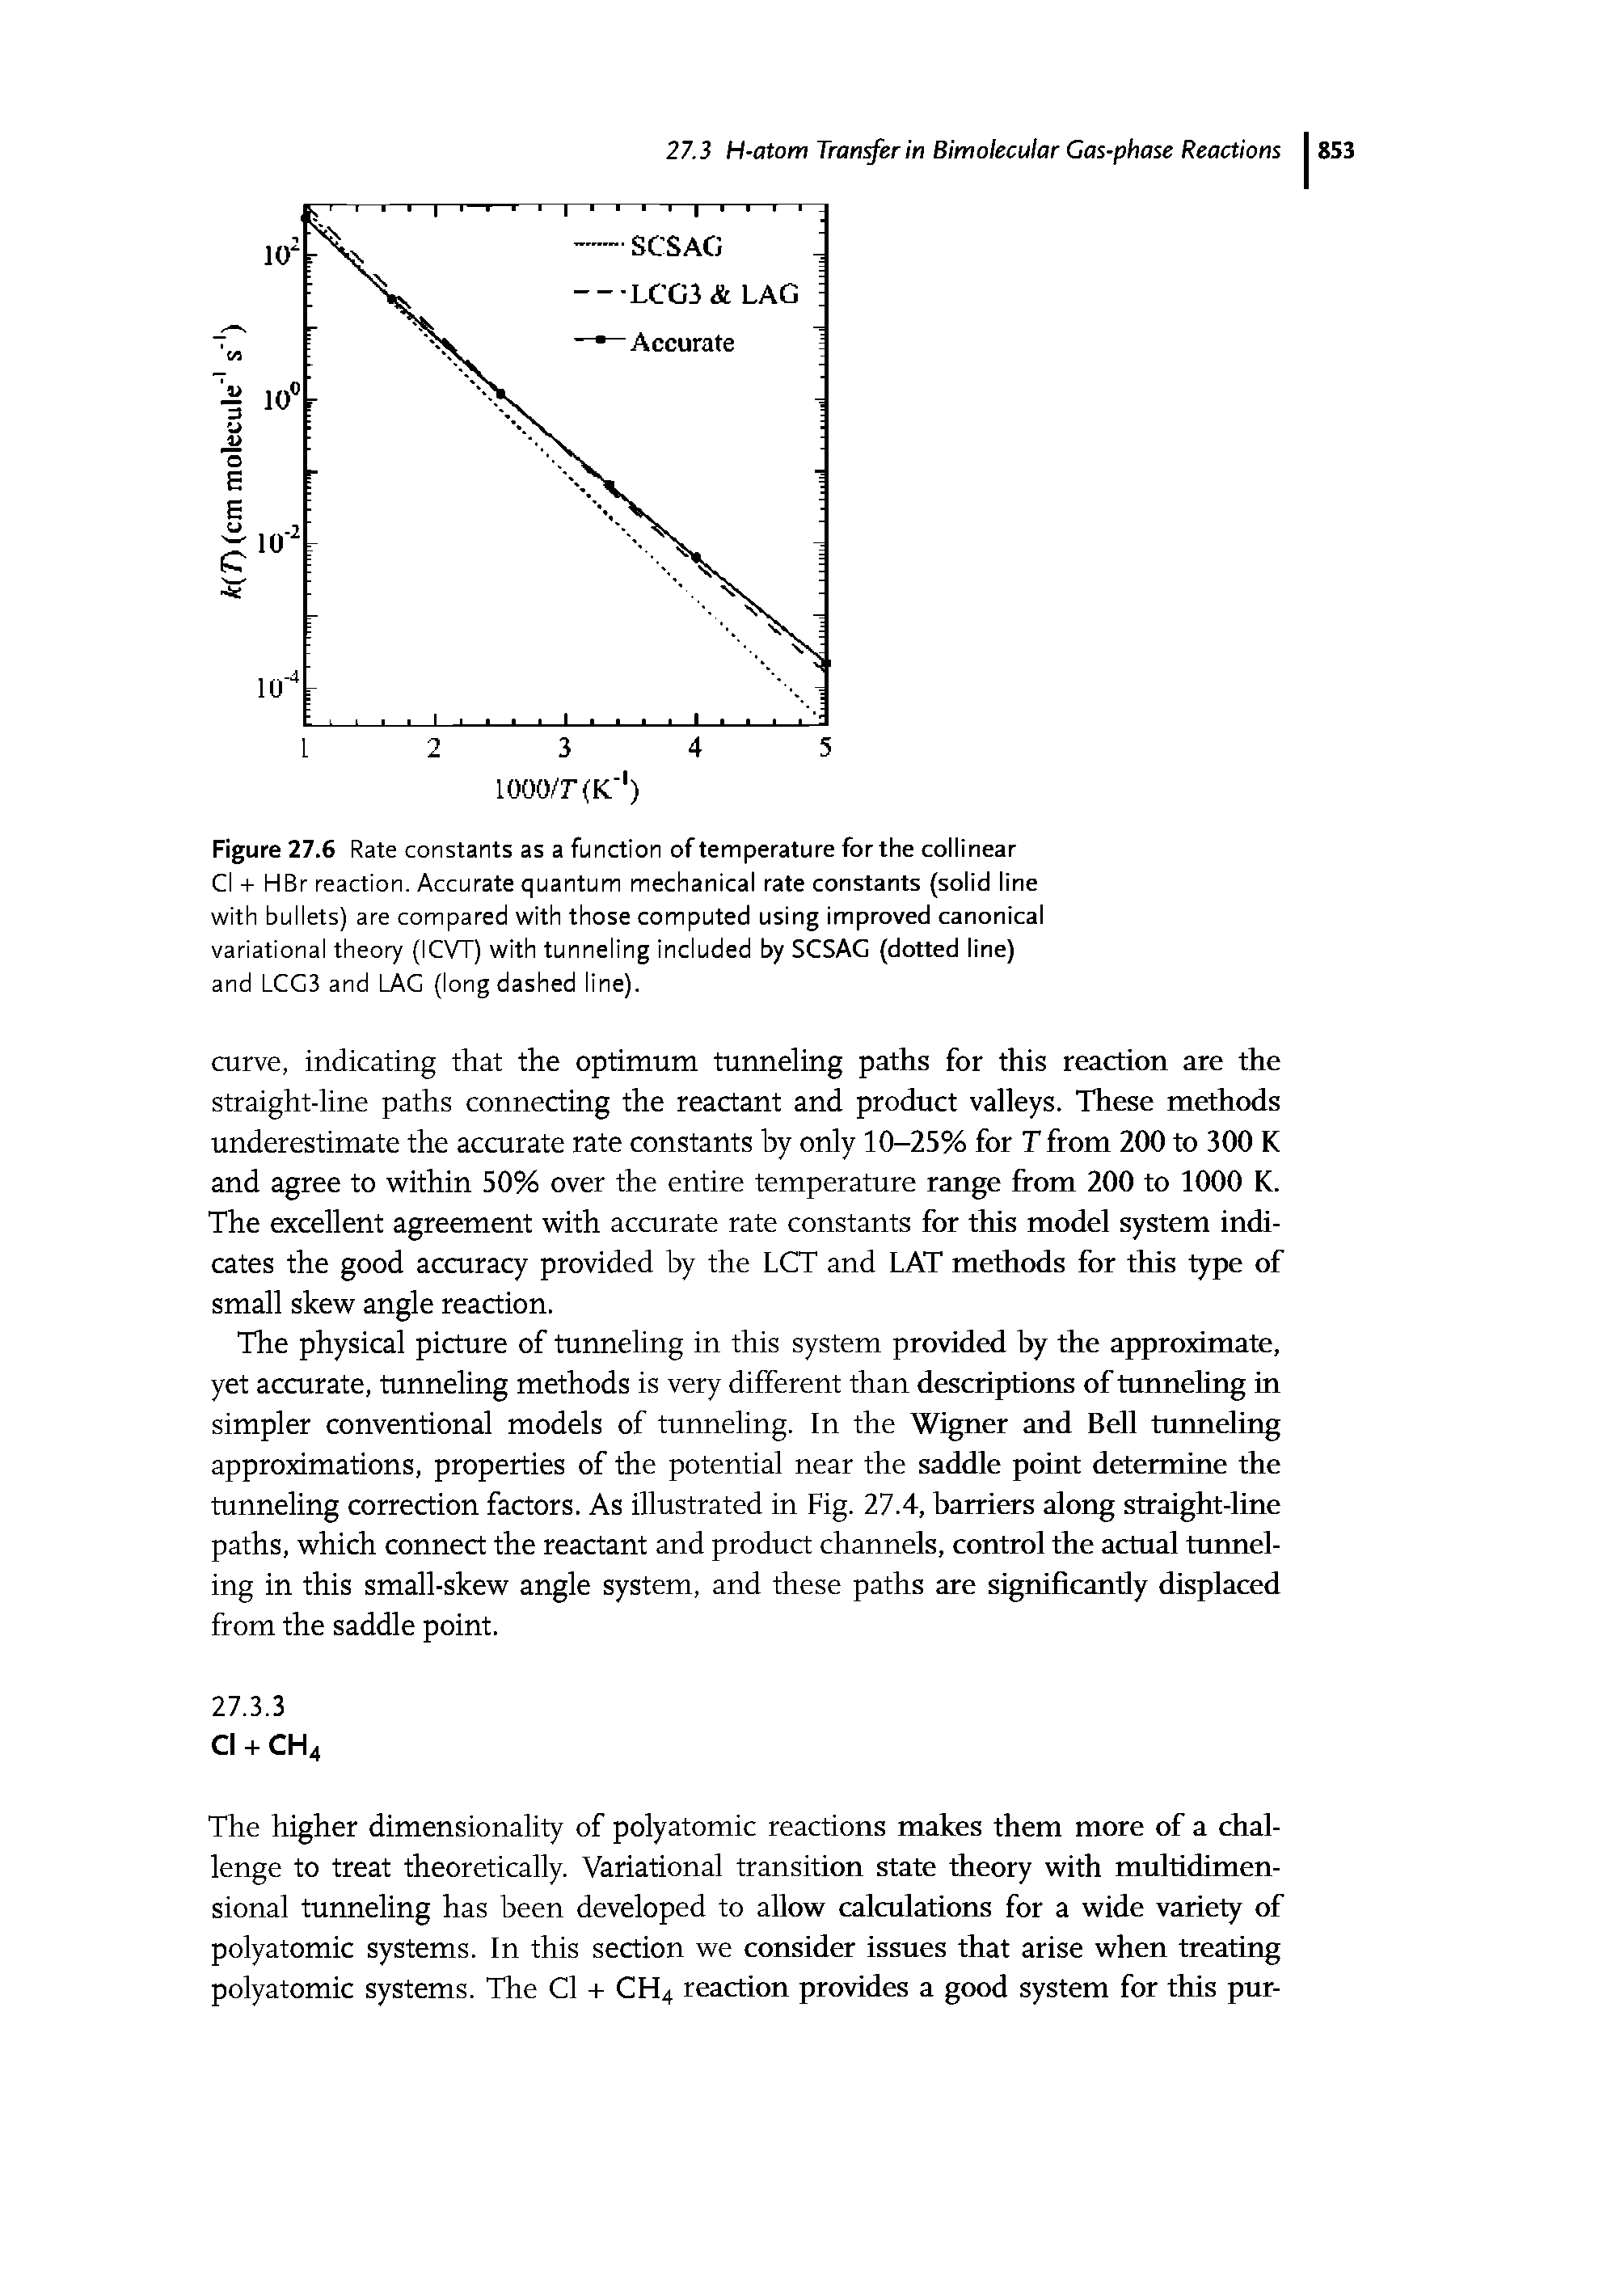 Figure 27.6 Rate constants as a function of temperature forthe collinear Cl + HBr reaction. Accurate quantum mechanical rate constants (solid line with bullets) are compared with those computed using improved canonical variational theory (ICVT) with tunneling included by SCSAG (dotted line) and LCG3 and LAG (long dashed line).